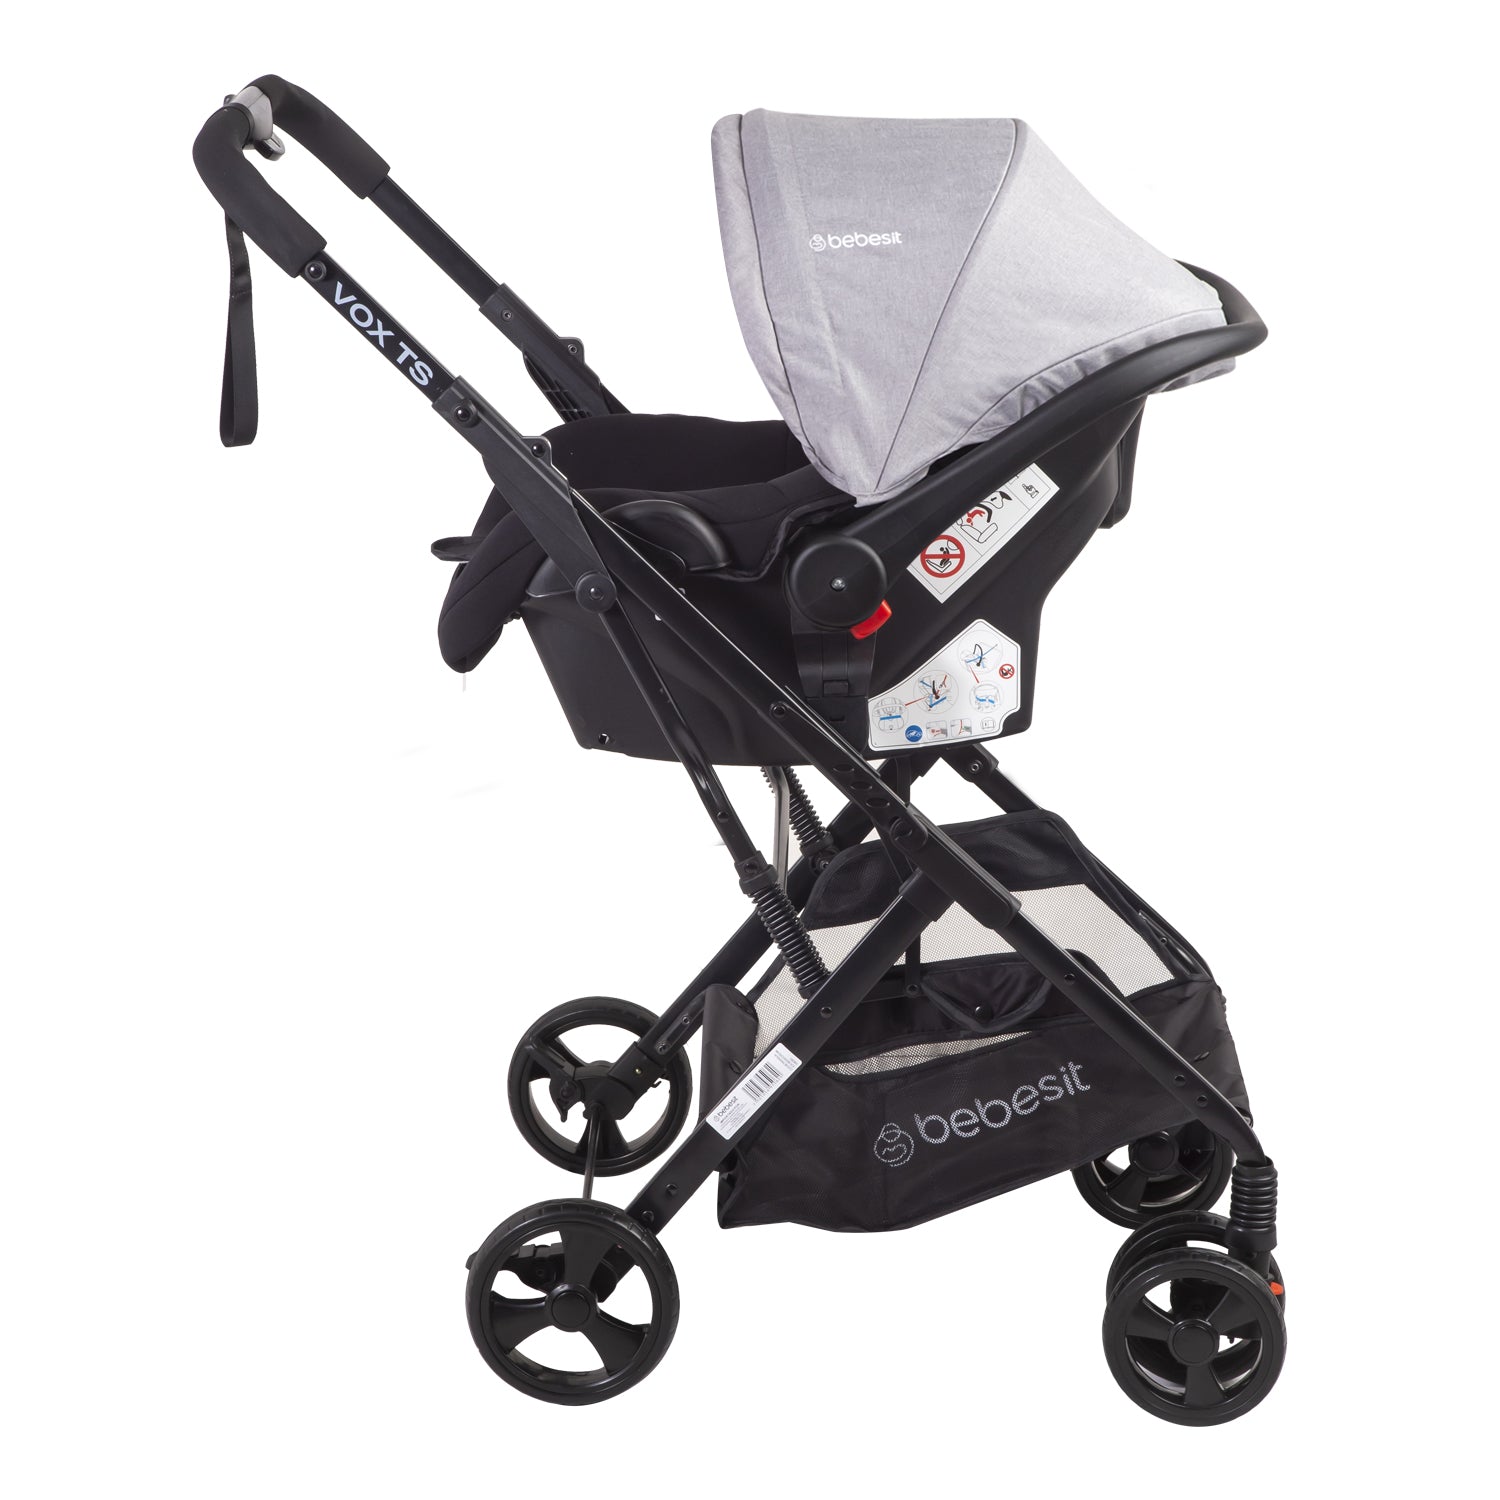 Coche Cuna travel system Vox Gris